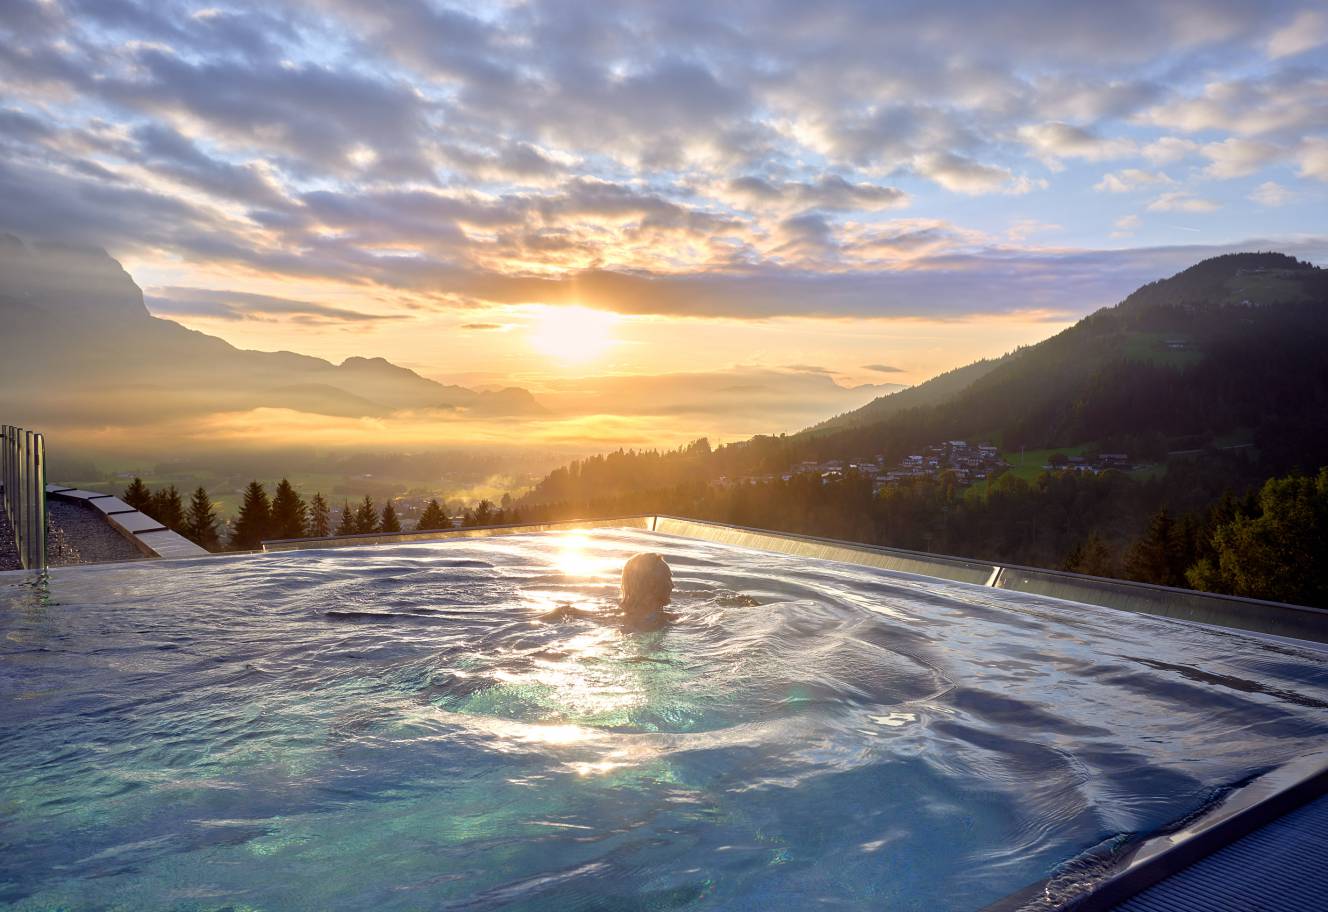 Unlimited Mountain Pool: Highlight with unfettered expansive views - Kaiserhof Ellmau